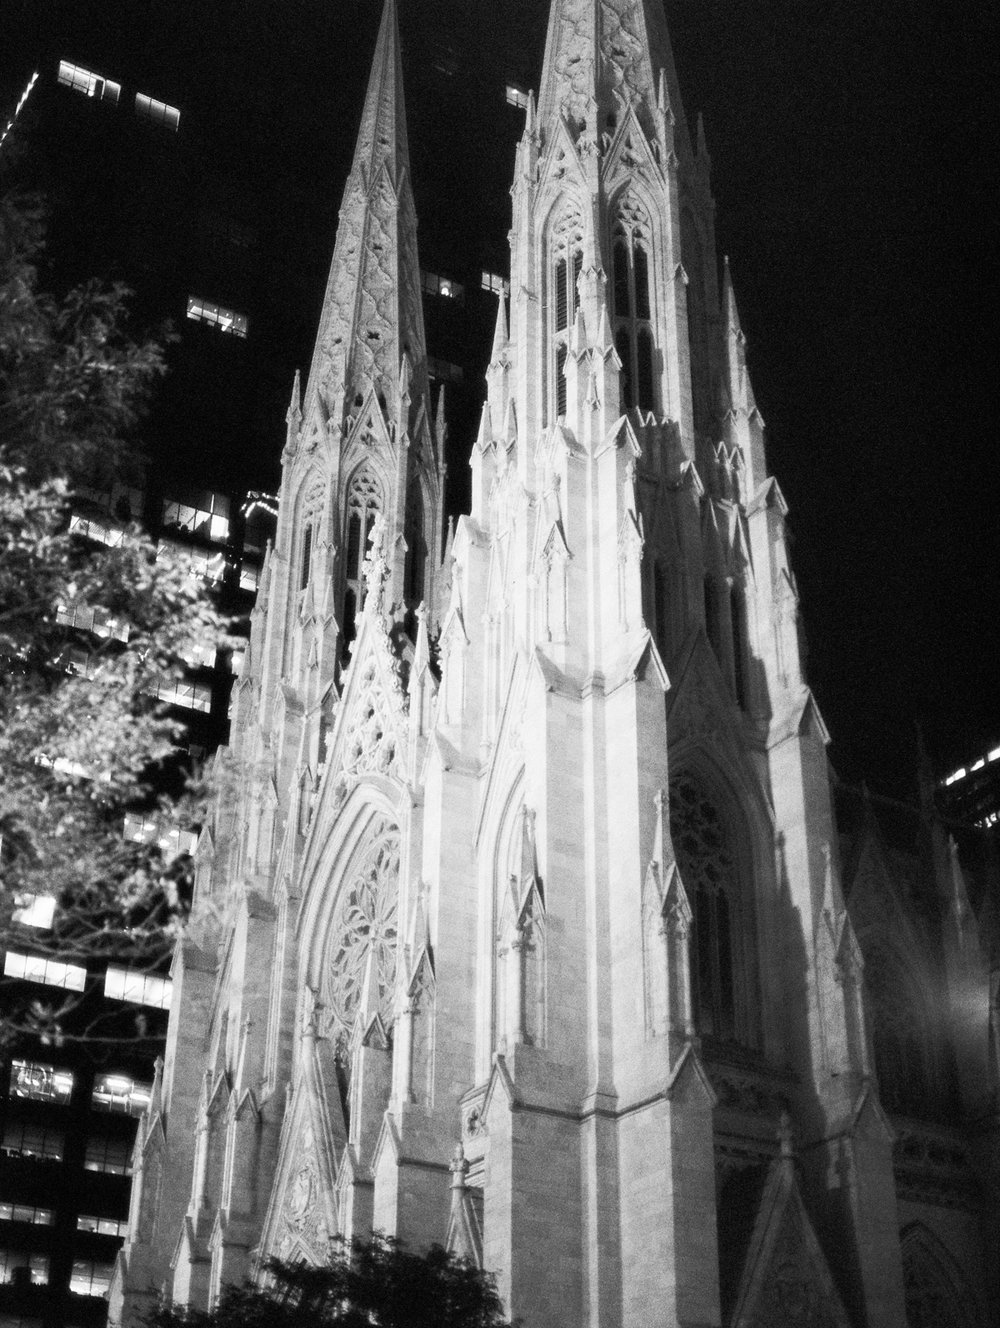  NYC church on black and white film at night. Ilford Delta 3200 